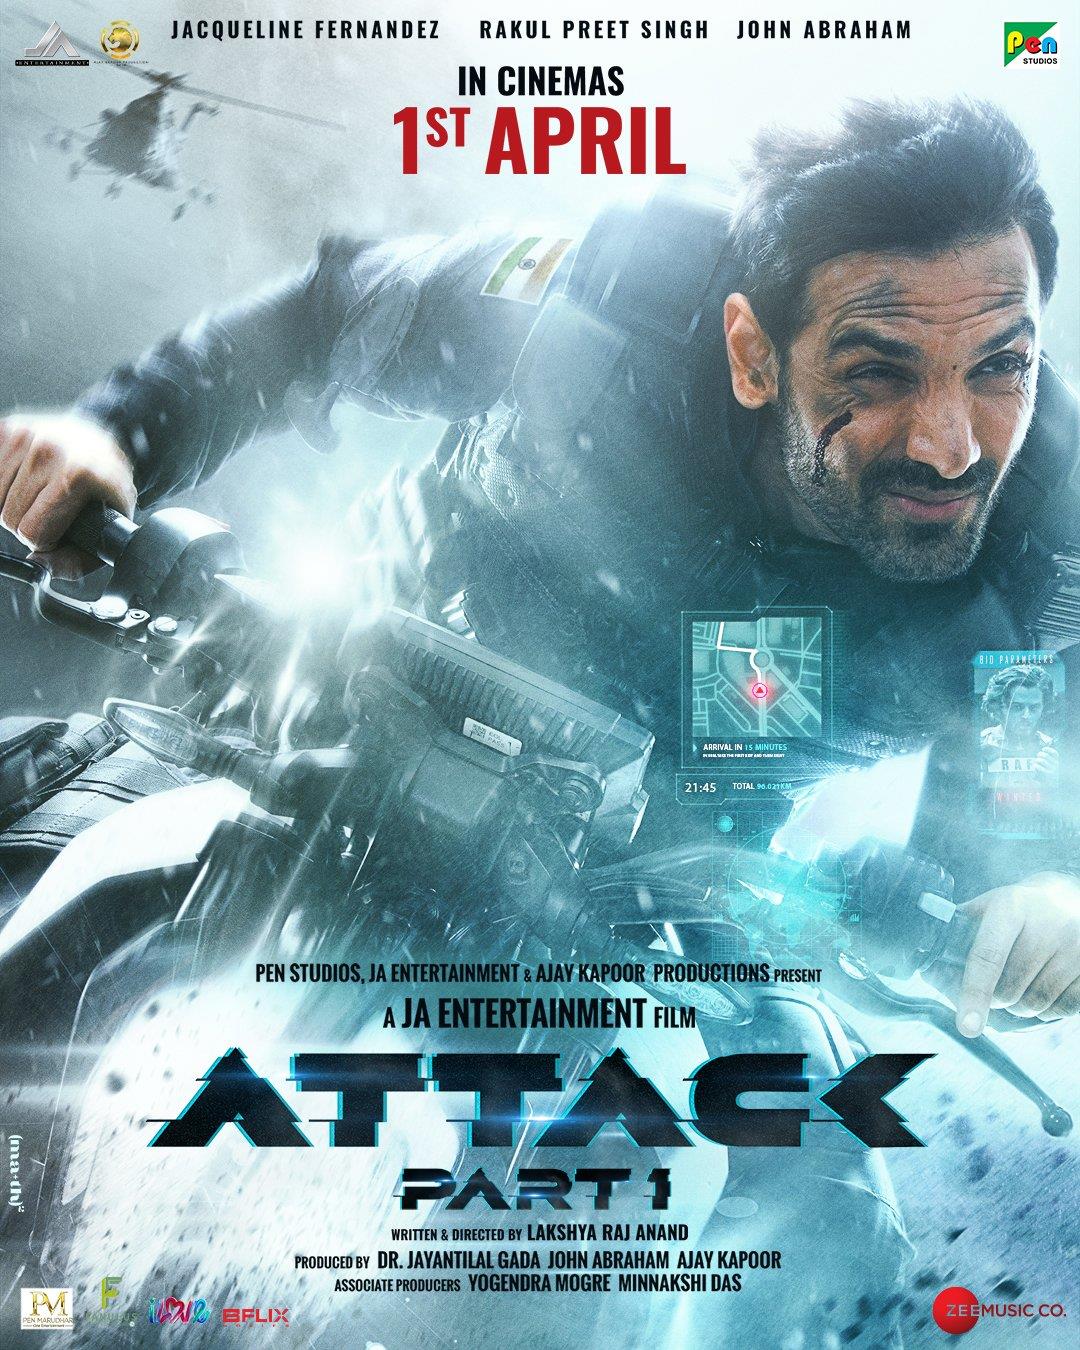 John Abraham's 'Attack - Part 1' trailer to hit with full force on March 7